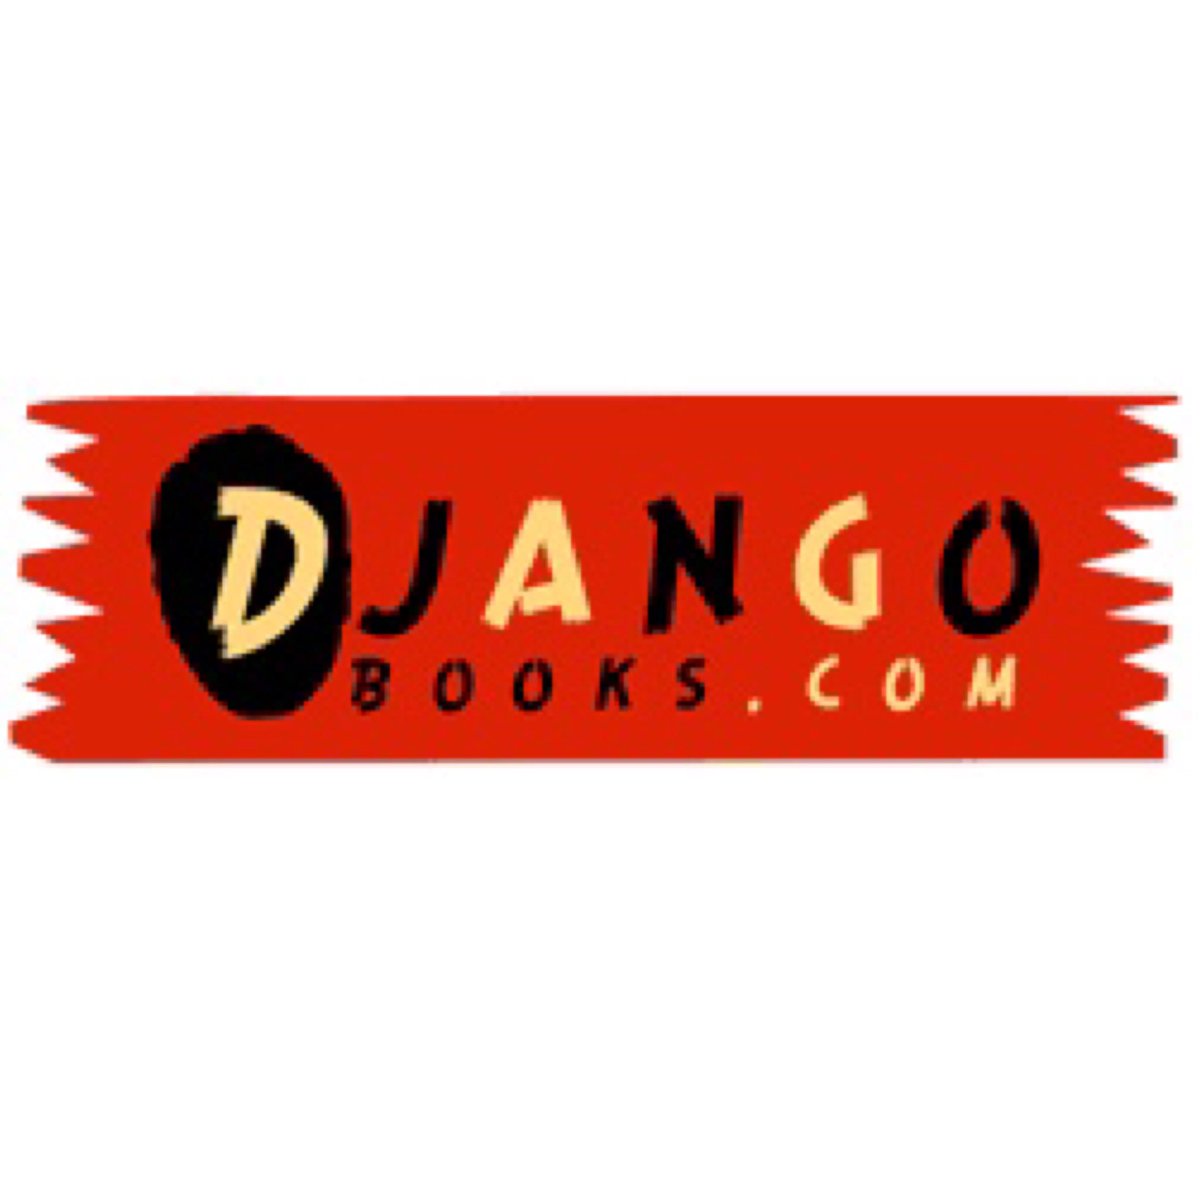 Calling all Gypsy Jazz musicians & enthusiasts... You MUST check out @DjangoBooks From guitars, to amps, to strings, accessories, etc. they have you covered! We are over the moon to have this amazing website resource as one of our Official Sponsors: djangobooks.com